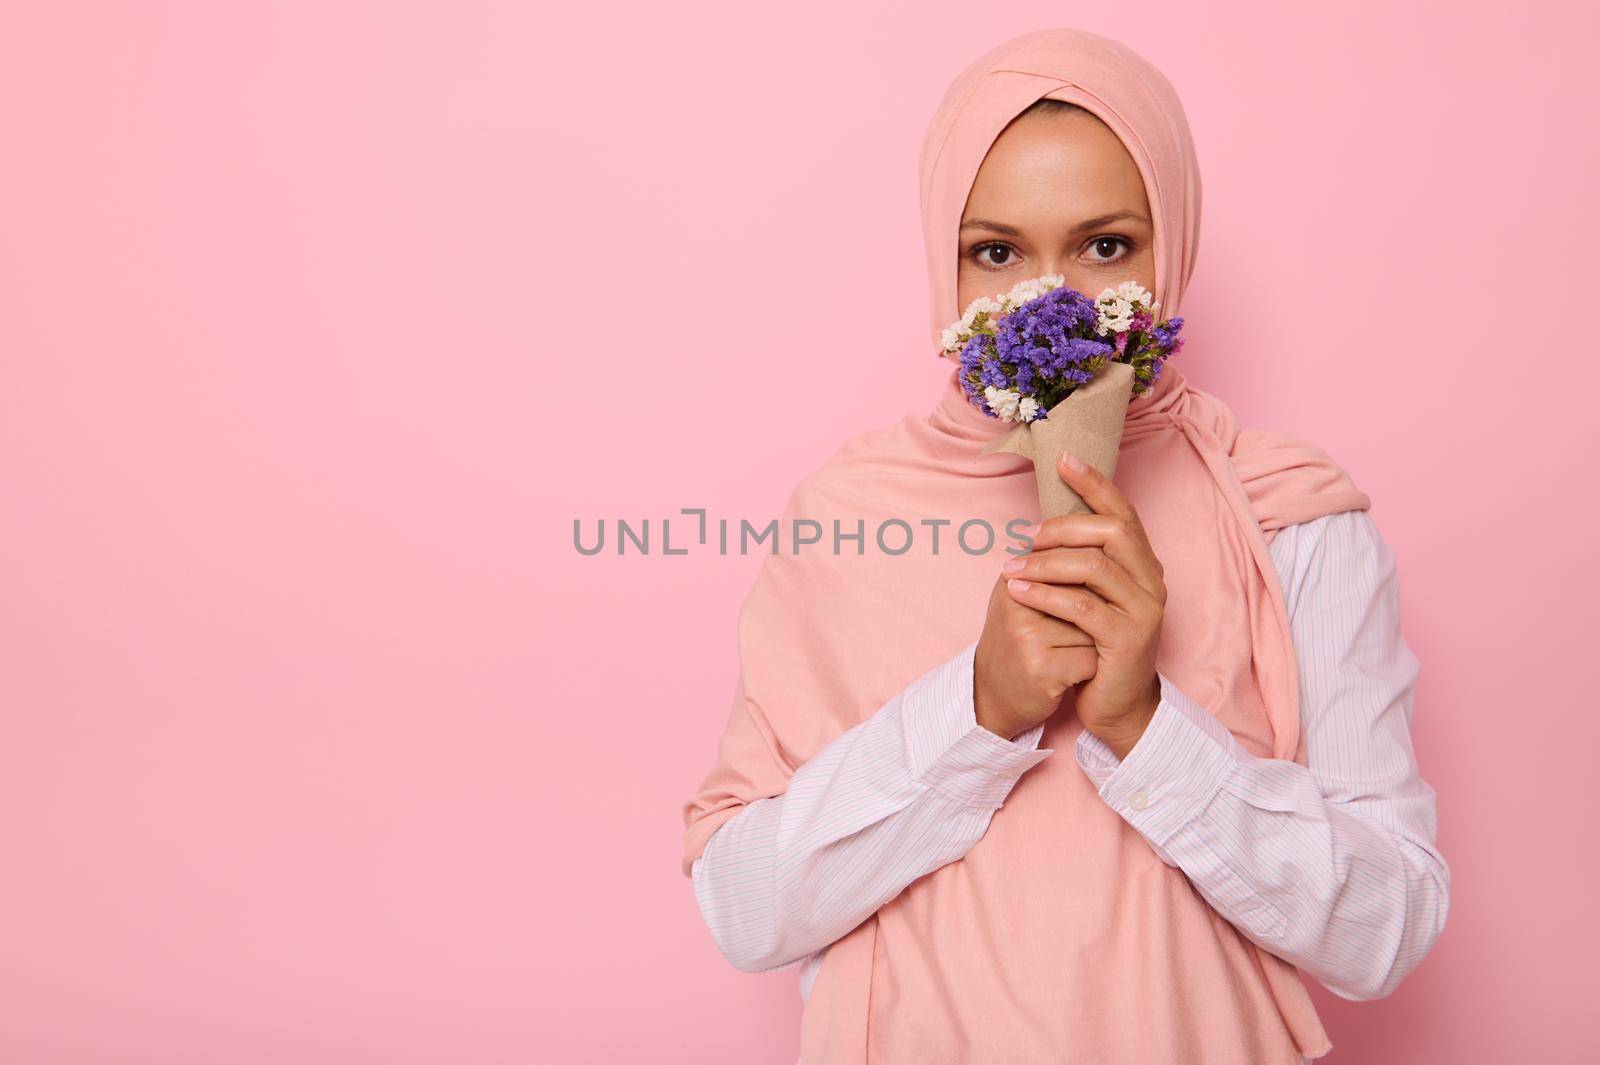 Confident portrait of young charming Arab Muslim woman in pink hijab with beautiful dark eyes, attractive gaze, looking at camera, covers half of her face and mouth with a craft bouquet of flowers by artgf